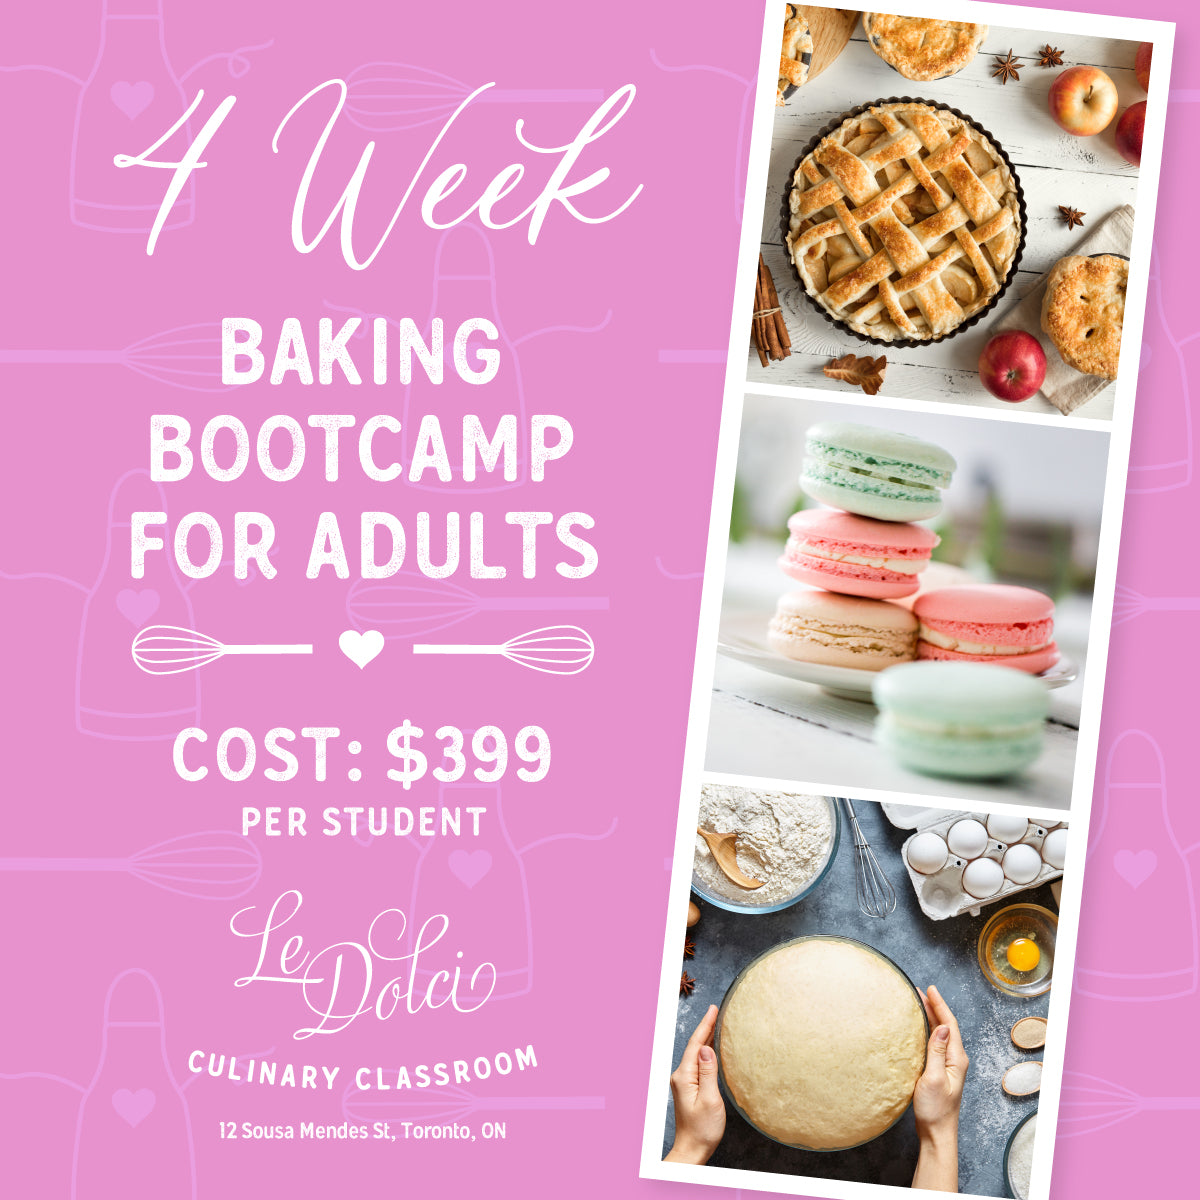 4 Week Baking Boot Camp for Adults